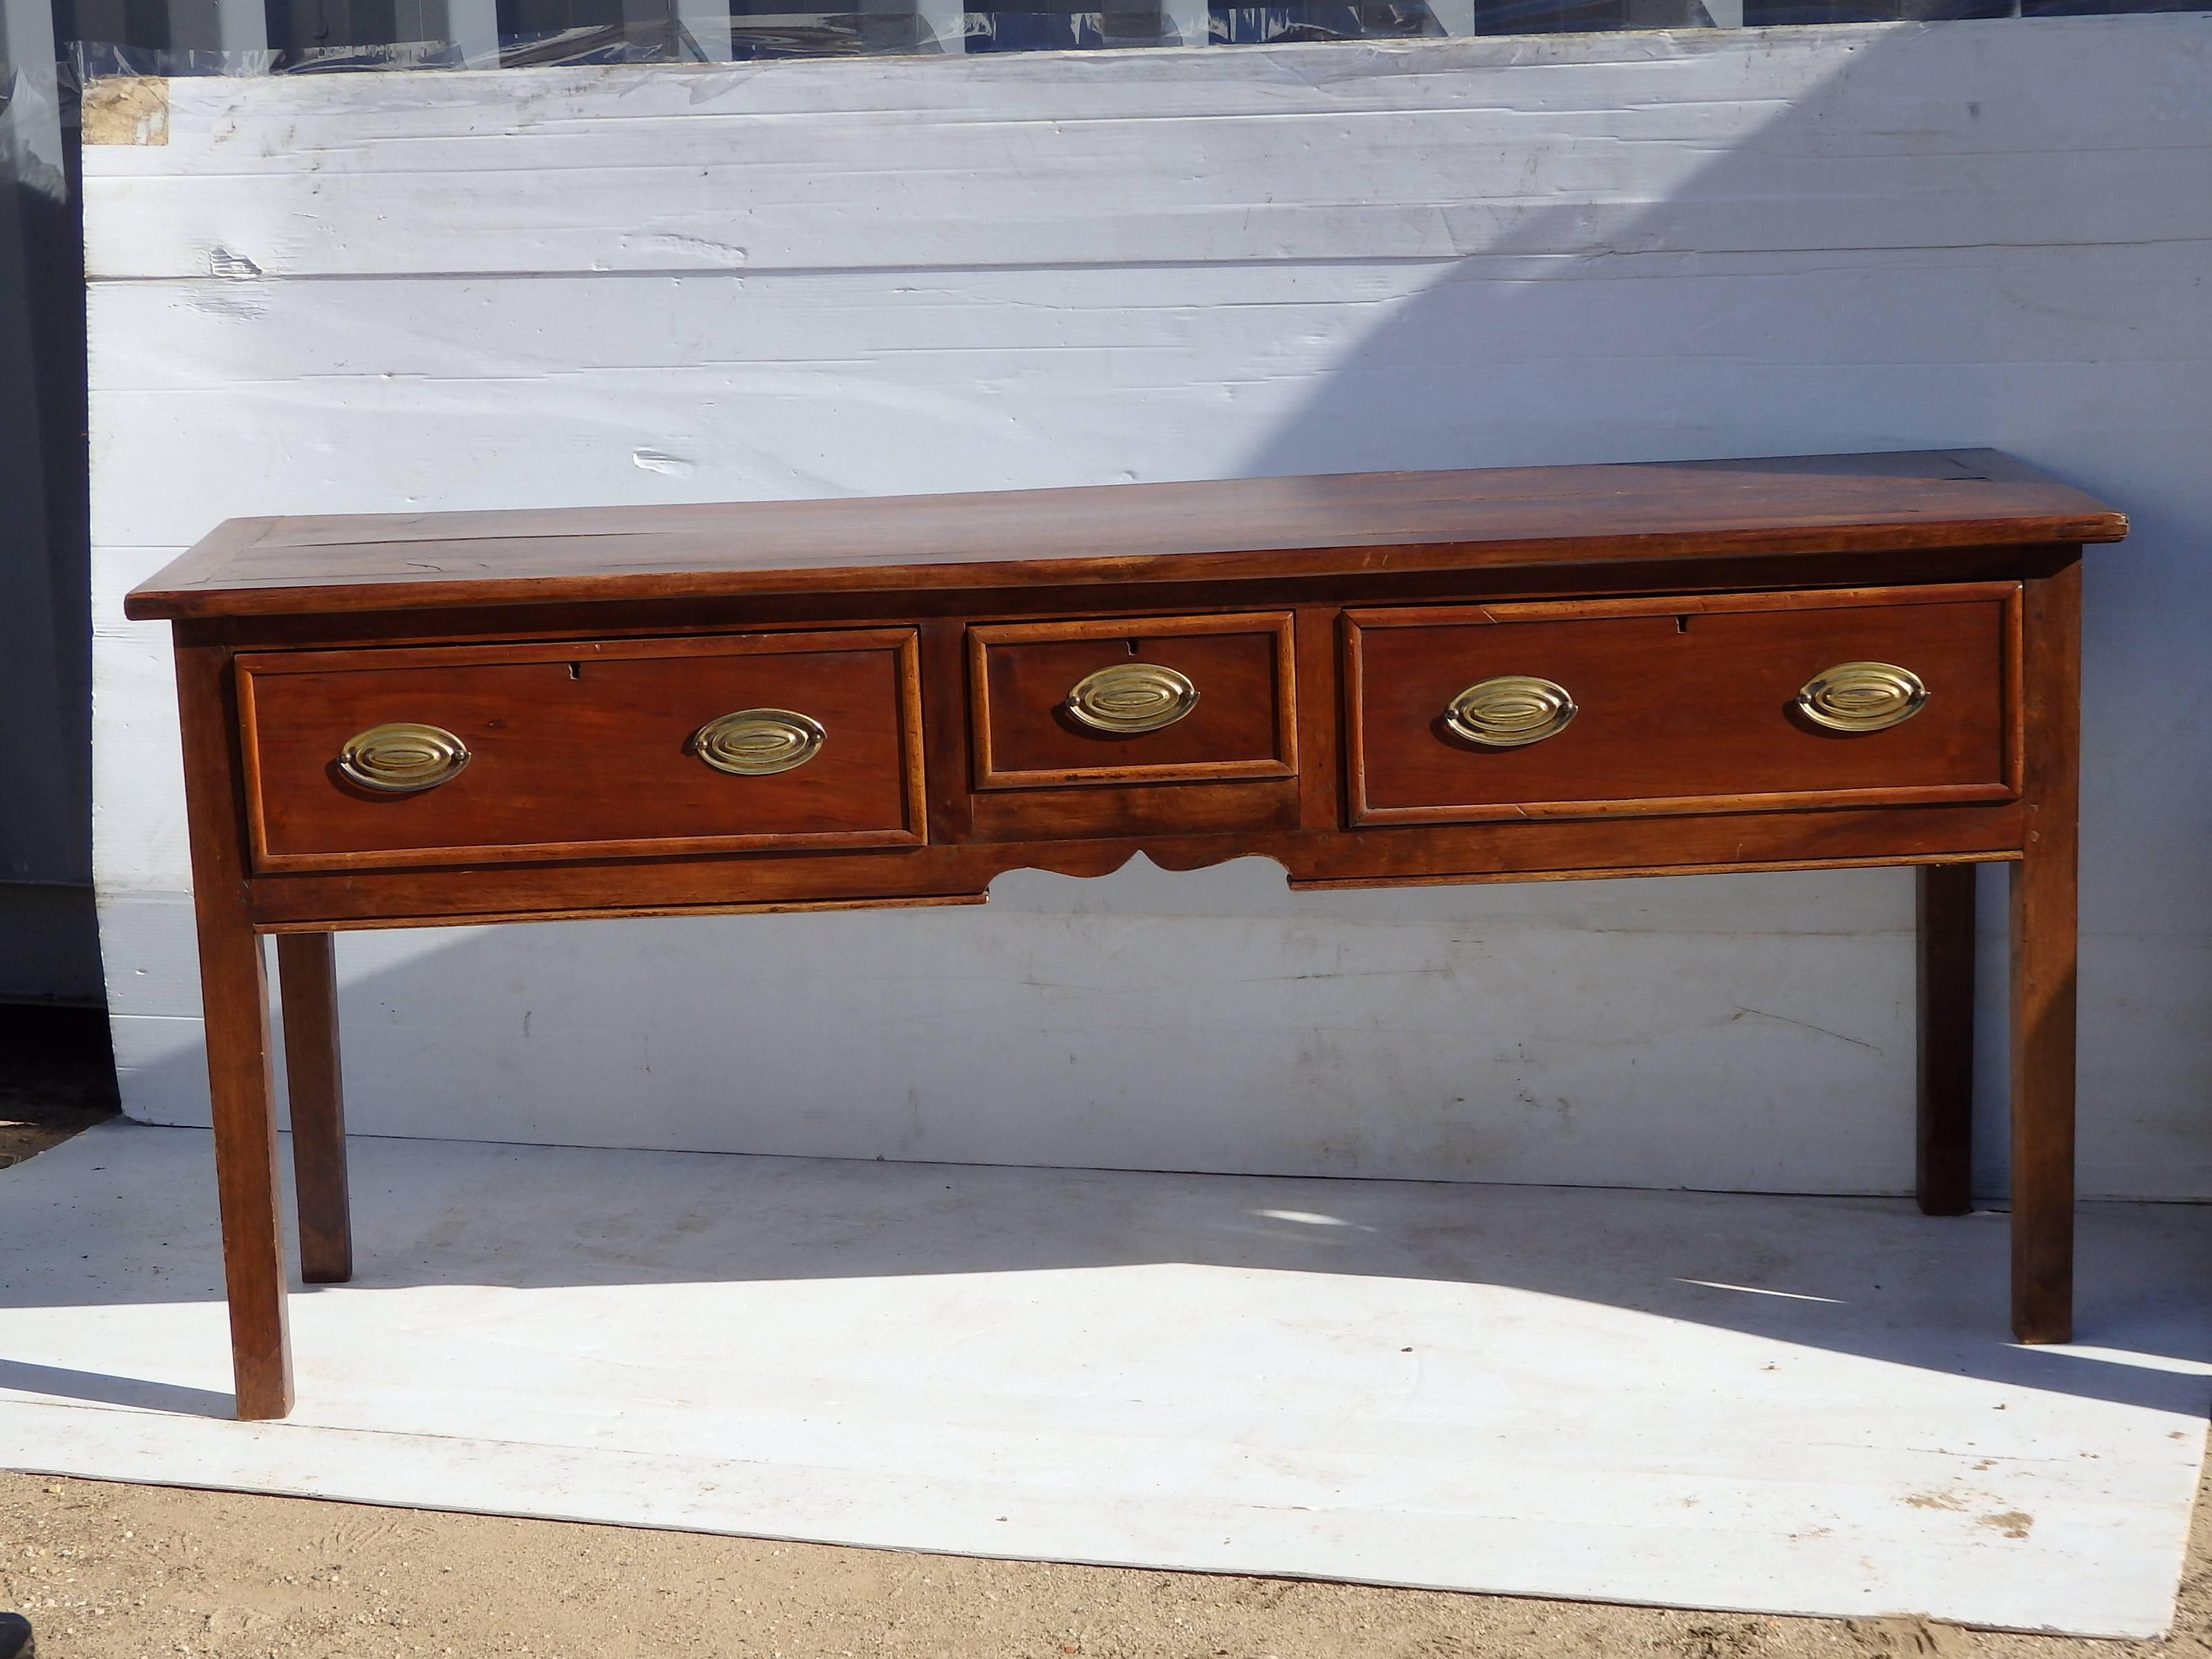 19th C French Server with three drawers, with brass hardware. Cleated ends, and tapered legs, lovely finish and patina
We specialize in servers! contact us for current stock
